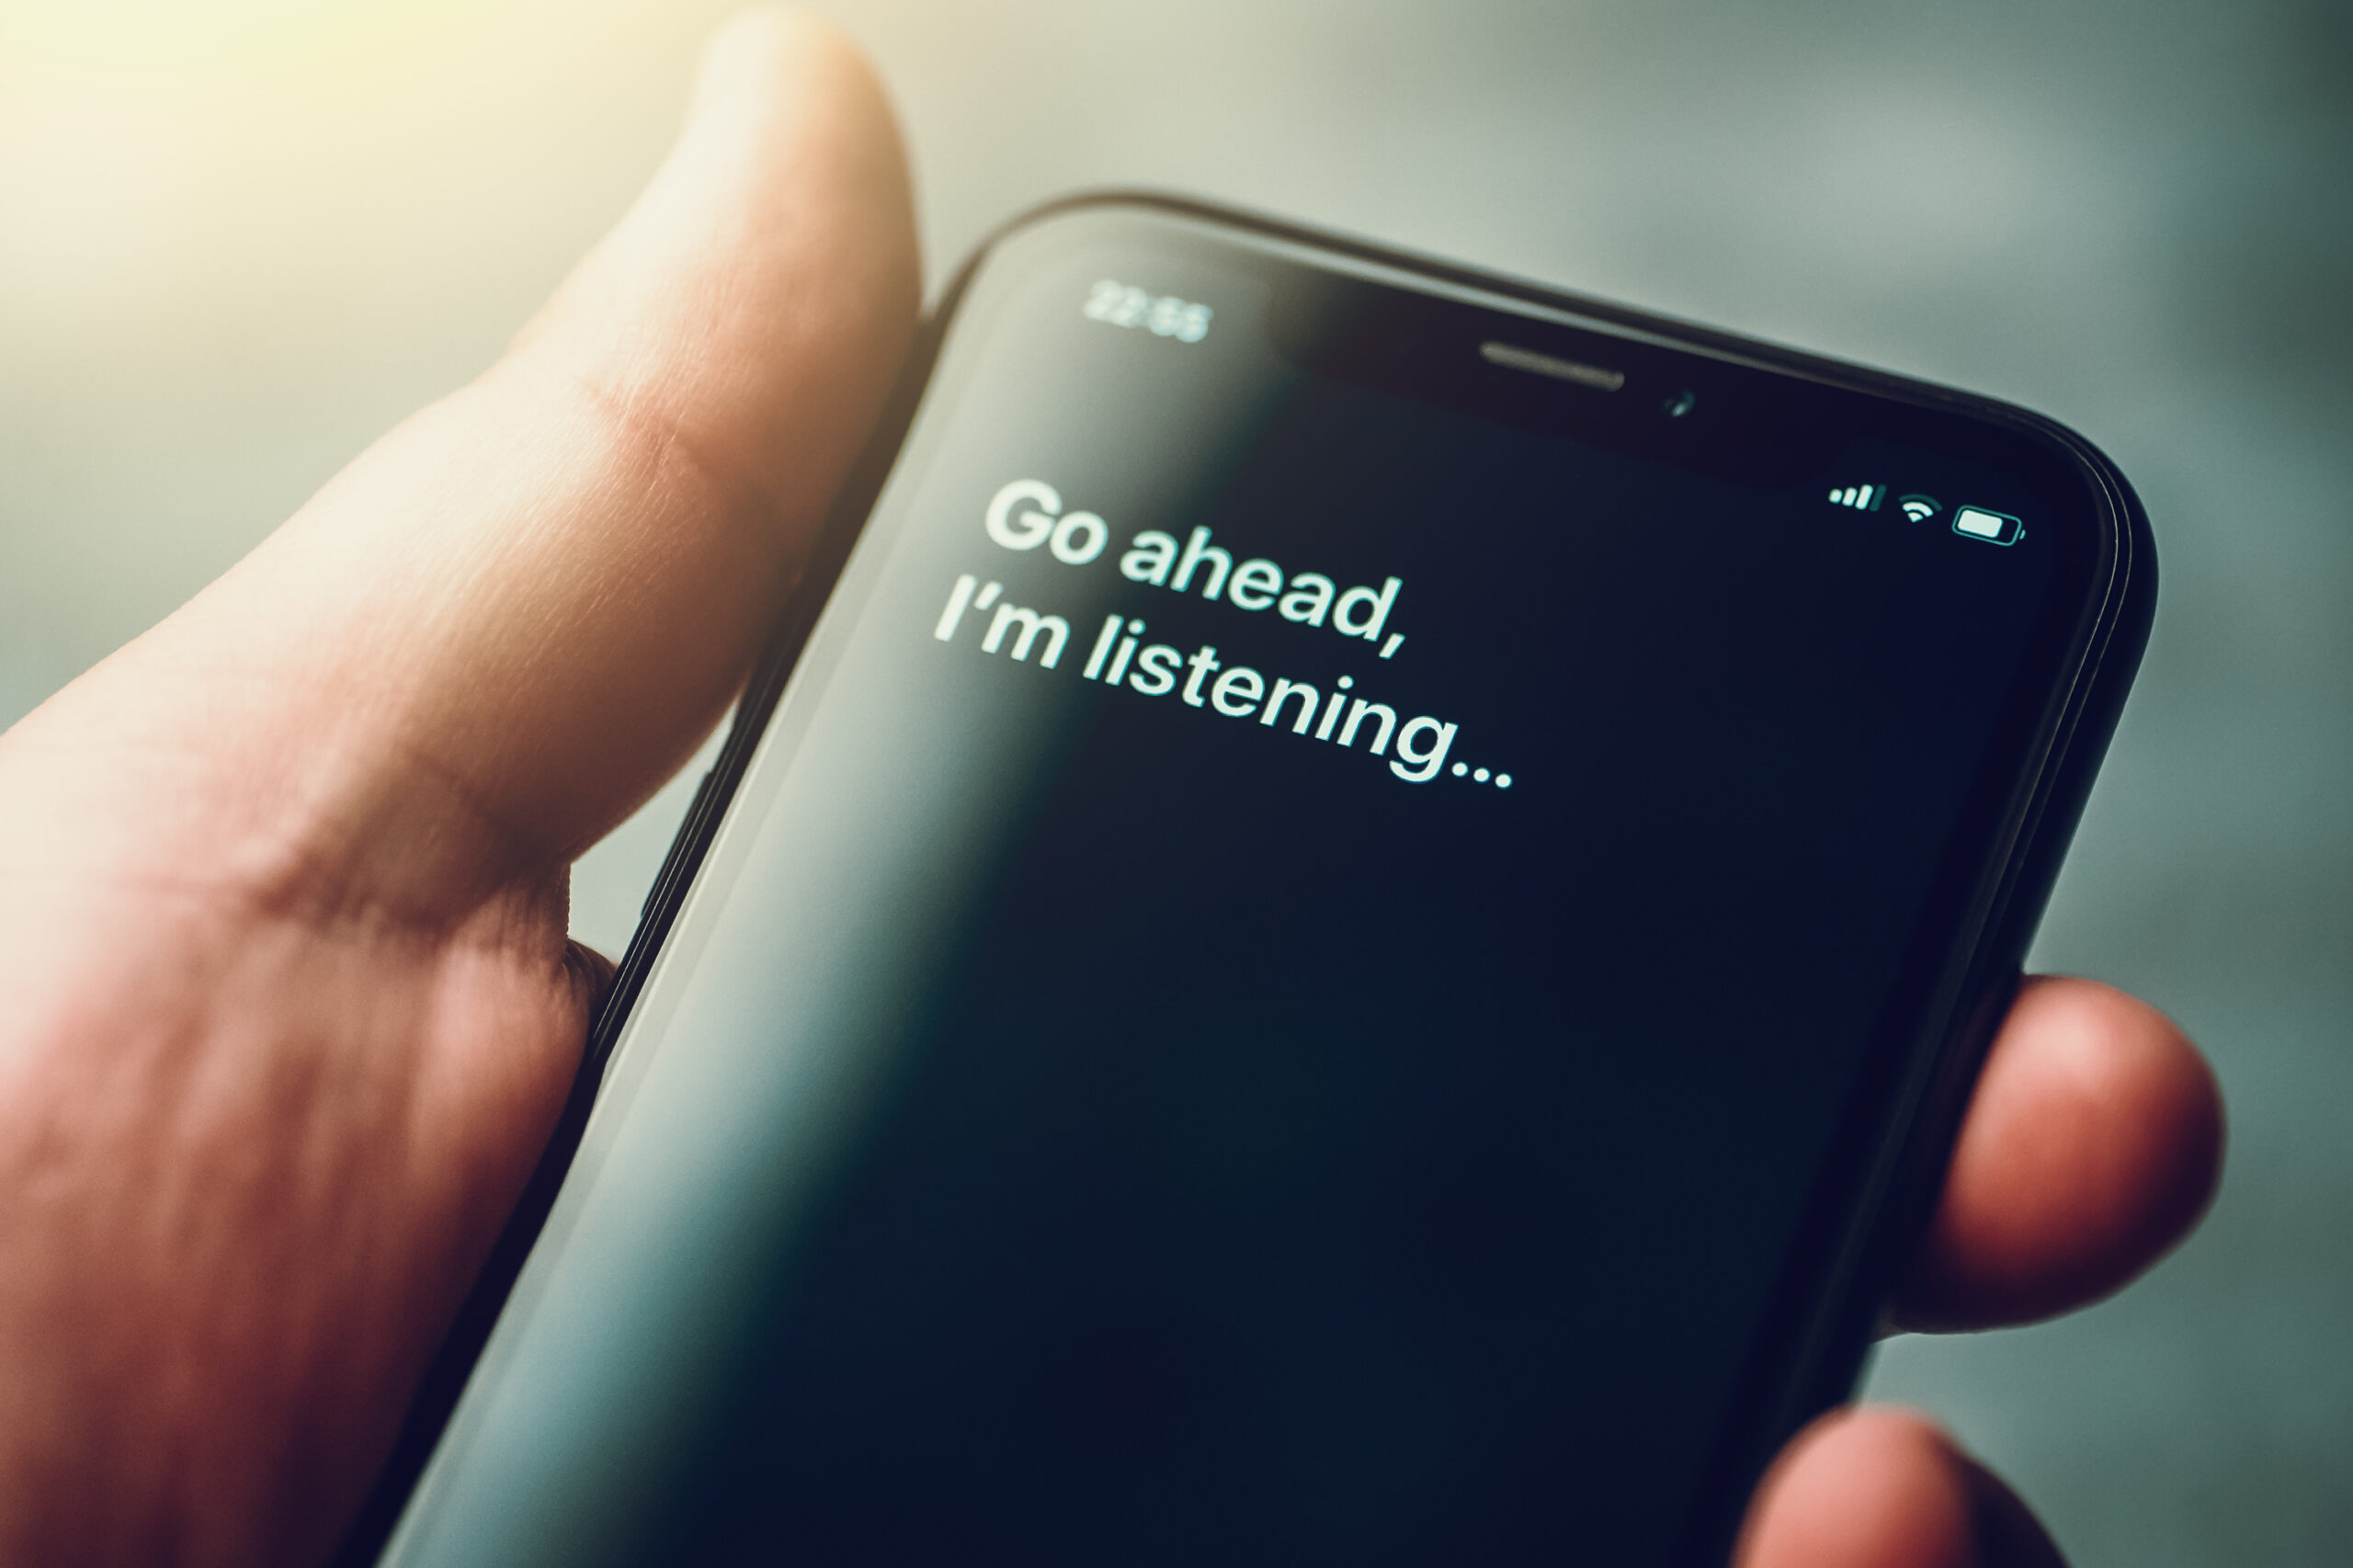 A phone screen showing an AI chat that starts with: "Go ahead, I'm listening..."